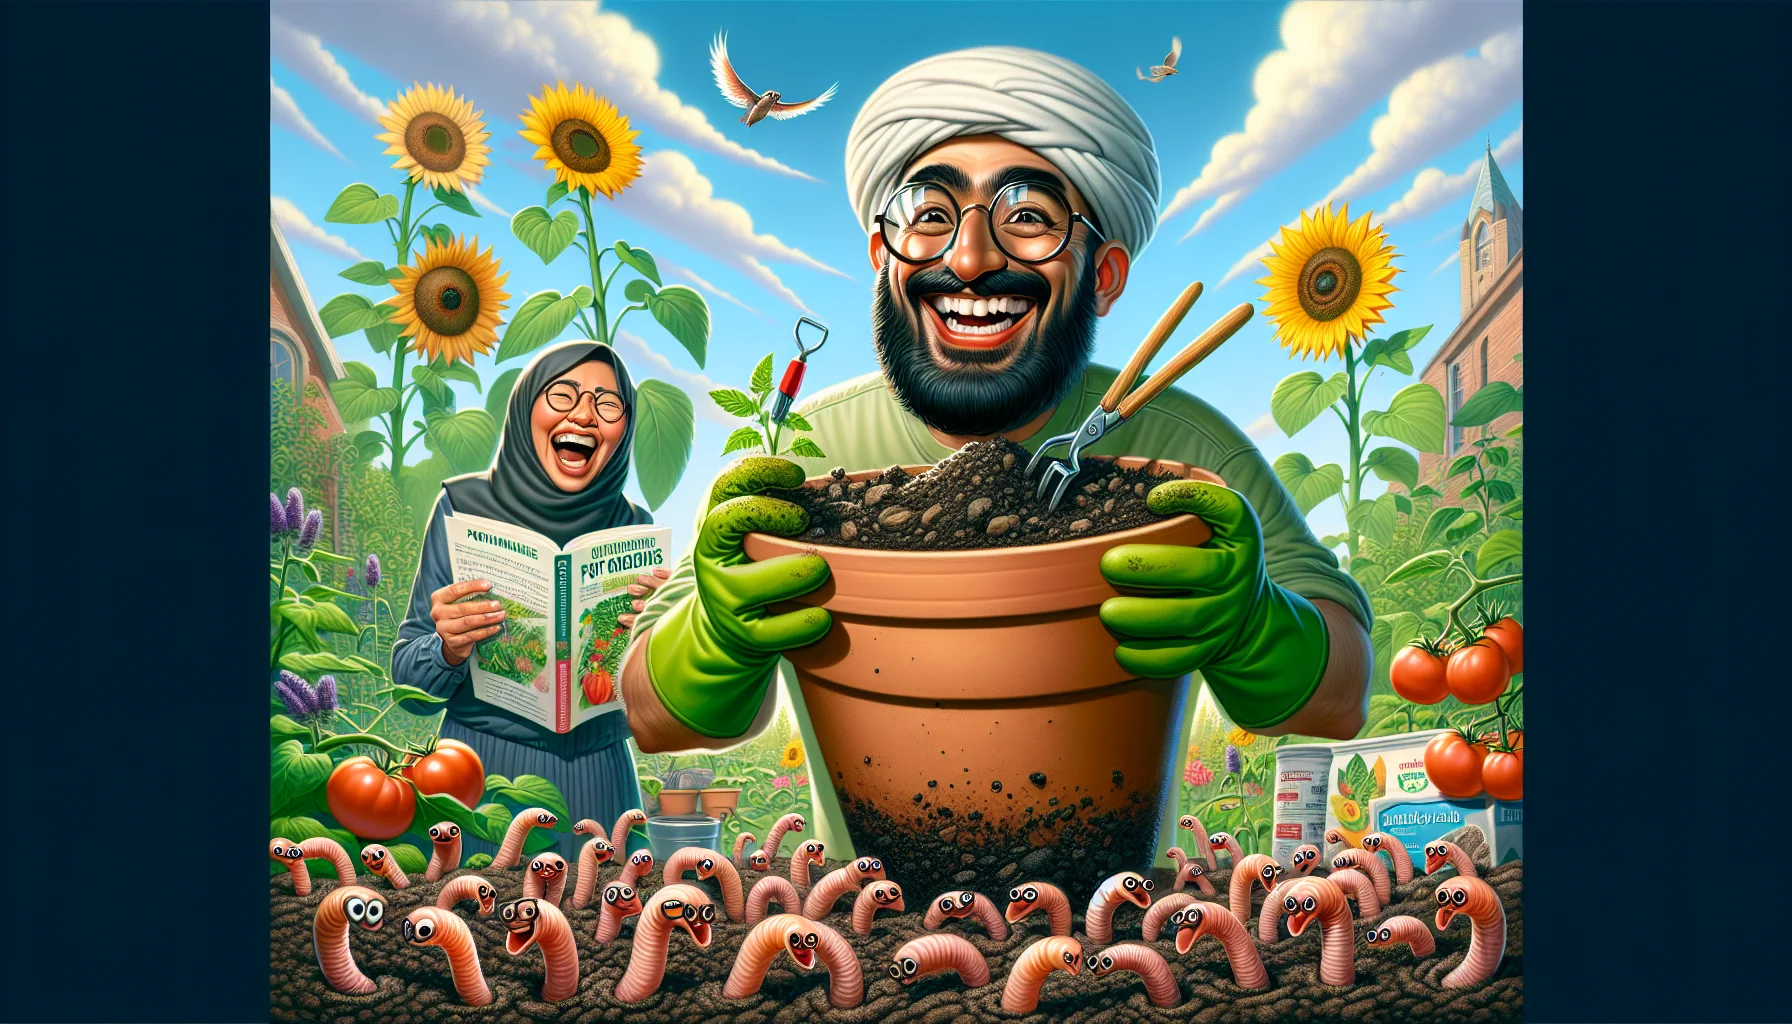 A caricature portrayal of a comedic gardening scenario. A Middle-Eastern male gardener, with a big smile and oversized gloves, is enthusiastically mixing a combination of organic materials, peat moss, and perlite into a large, exaggeratedly immense flower pot, surrounded by a flock of inquisitively watching earthworms donning glasses and reading books on Potting Soil Basics. His South Asian female companion, laughing and holding a bunch of healthy seedlings ready to be potted, joins this lighthearted, inviting scene of an urban garden. The backdrop is filled with towering sunflowers and tomato vines reaching up to a clear sunny sky.